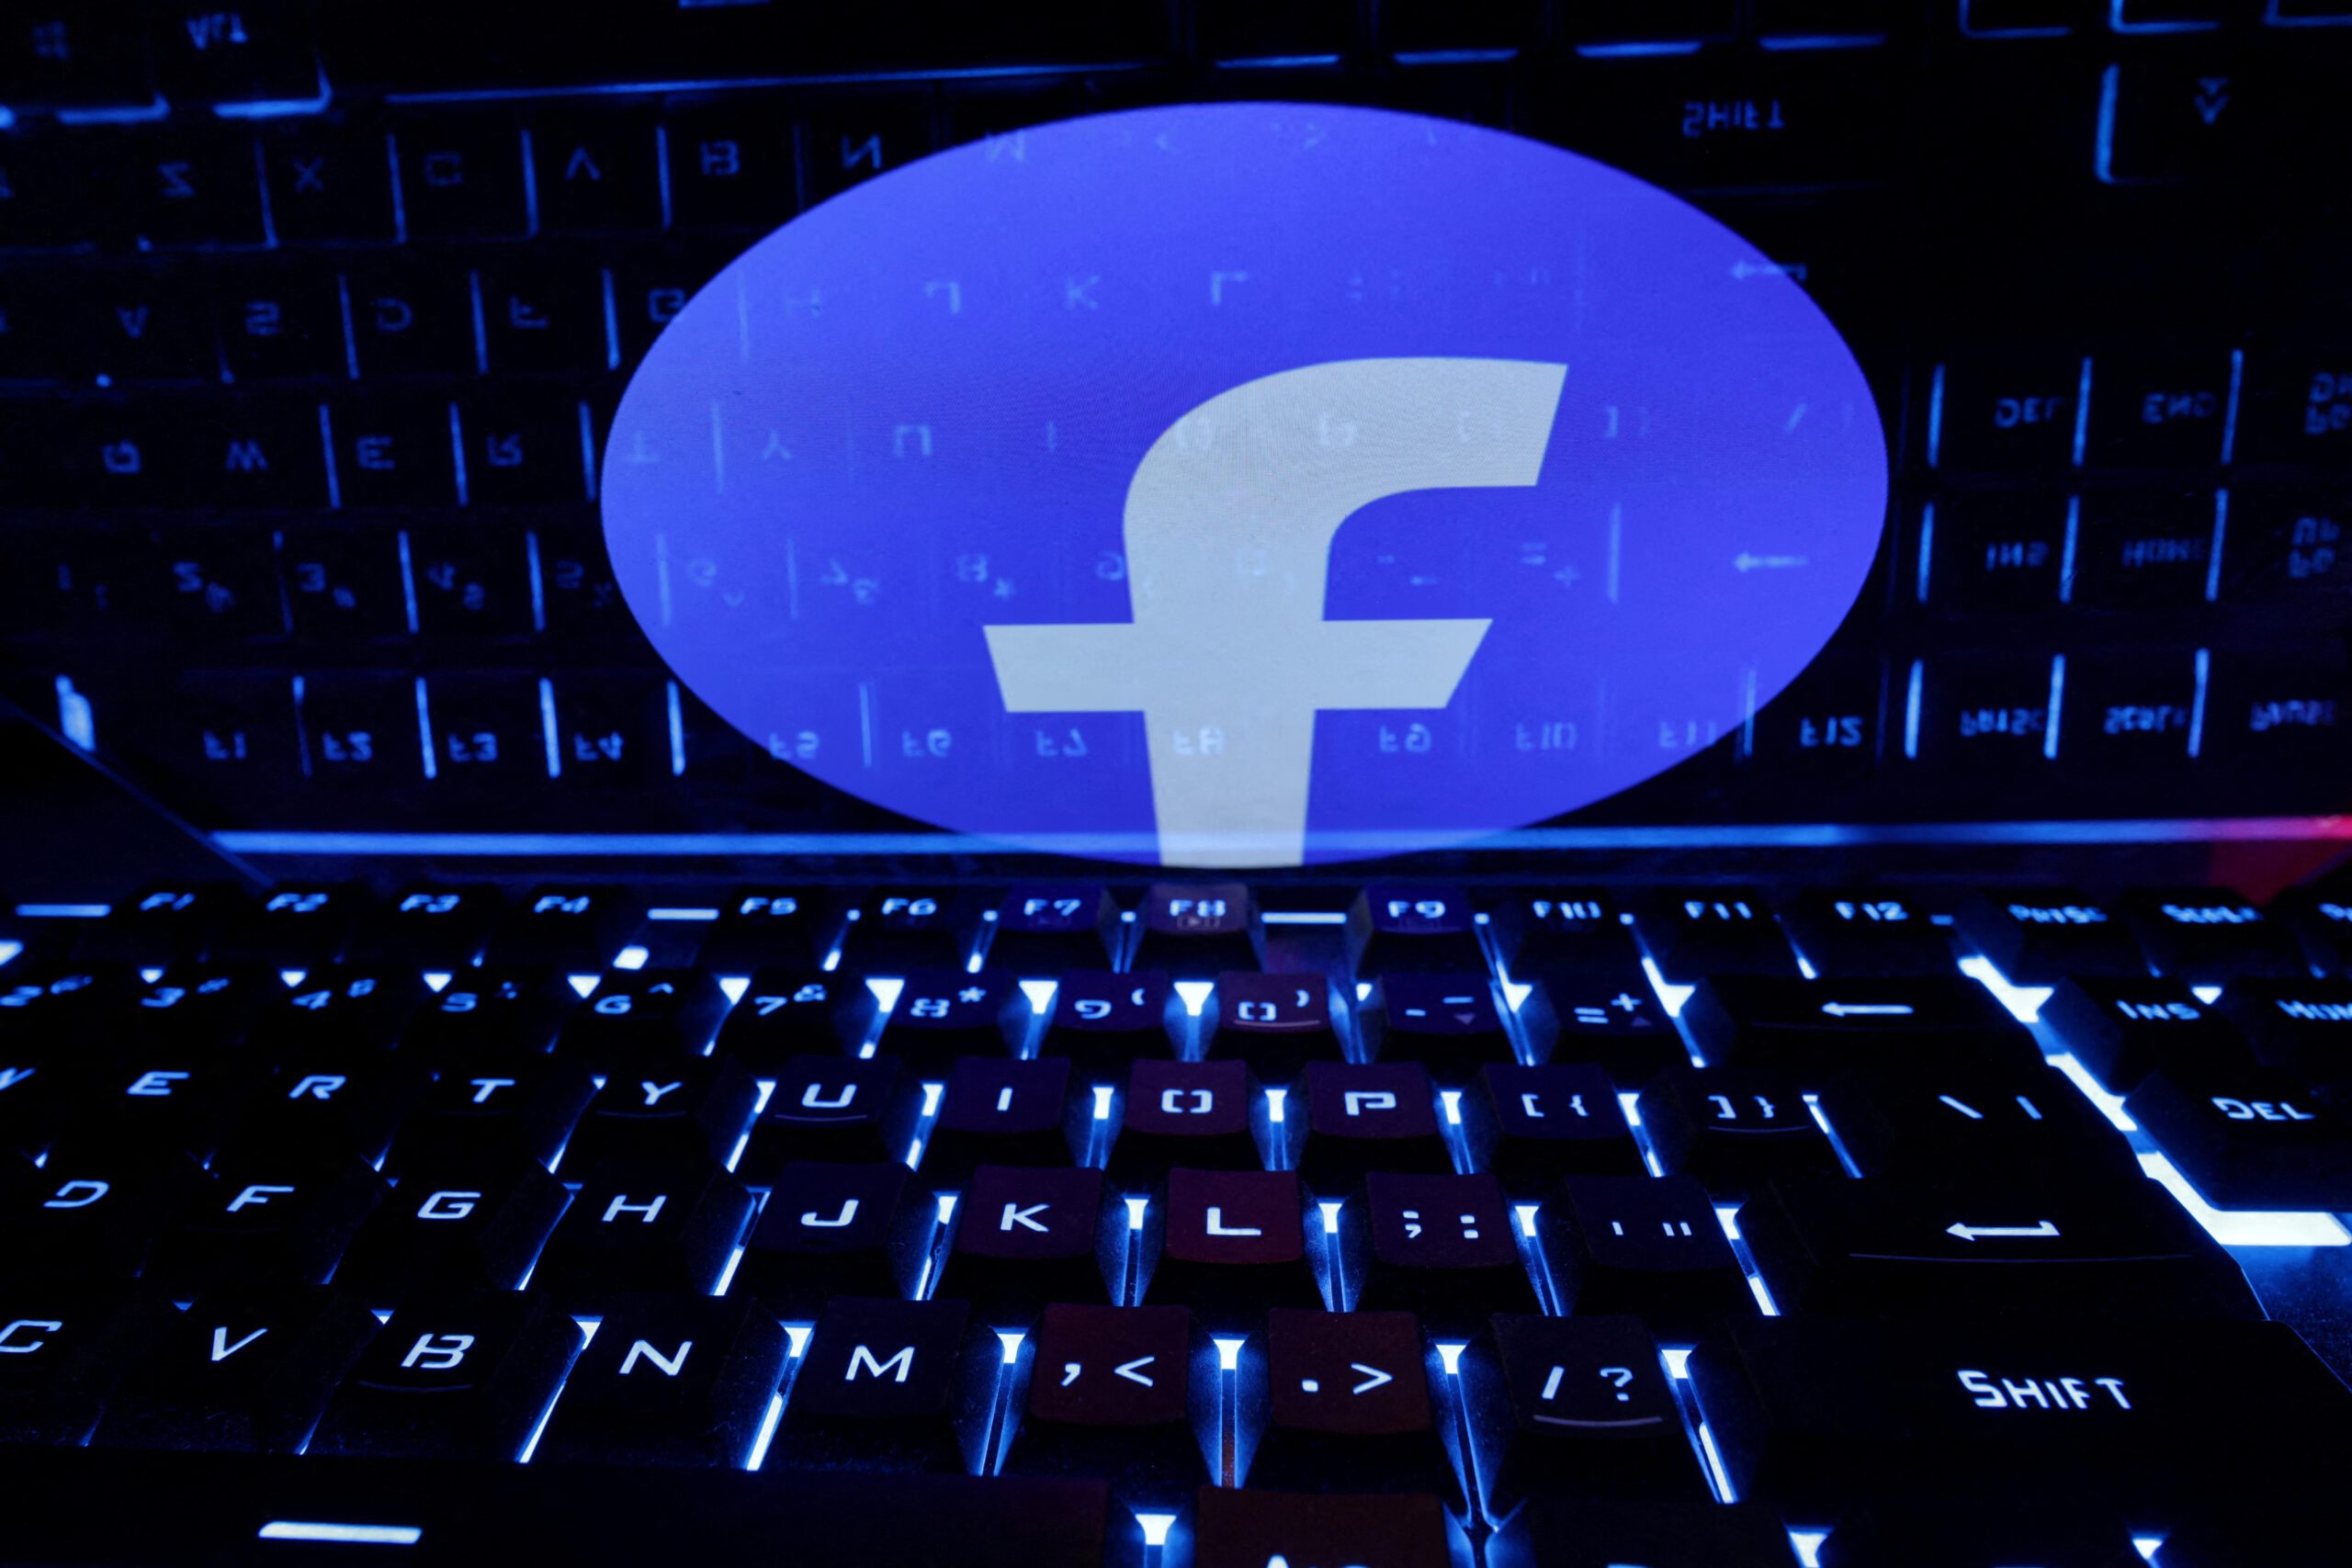 Vietnam arrests Facebook user for attempt to ‘overthrow the state’